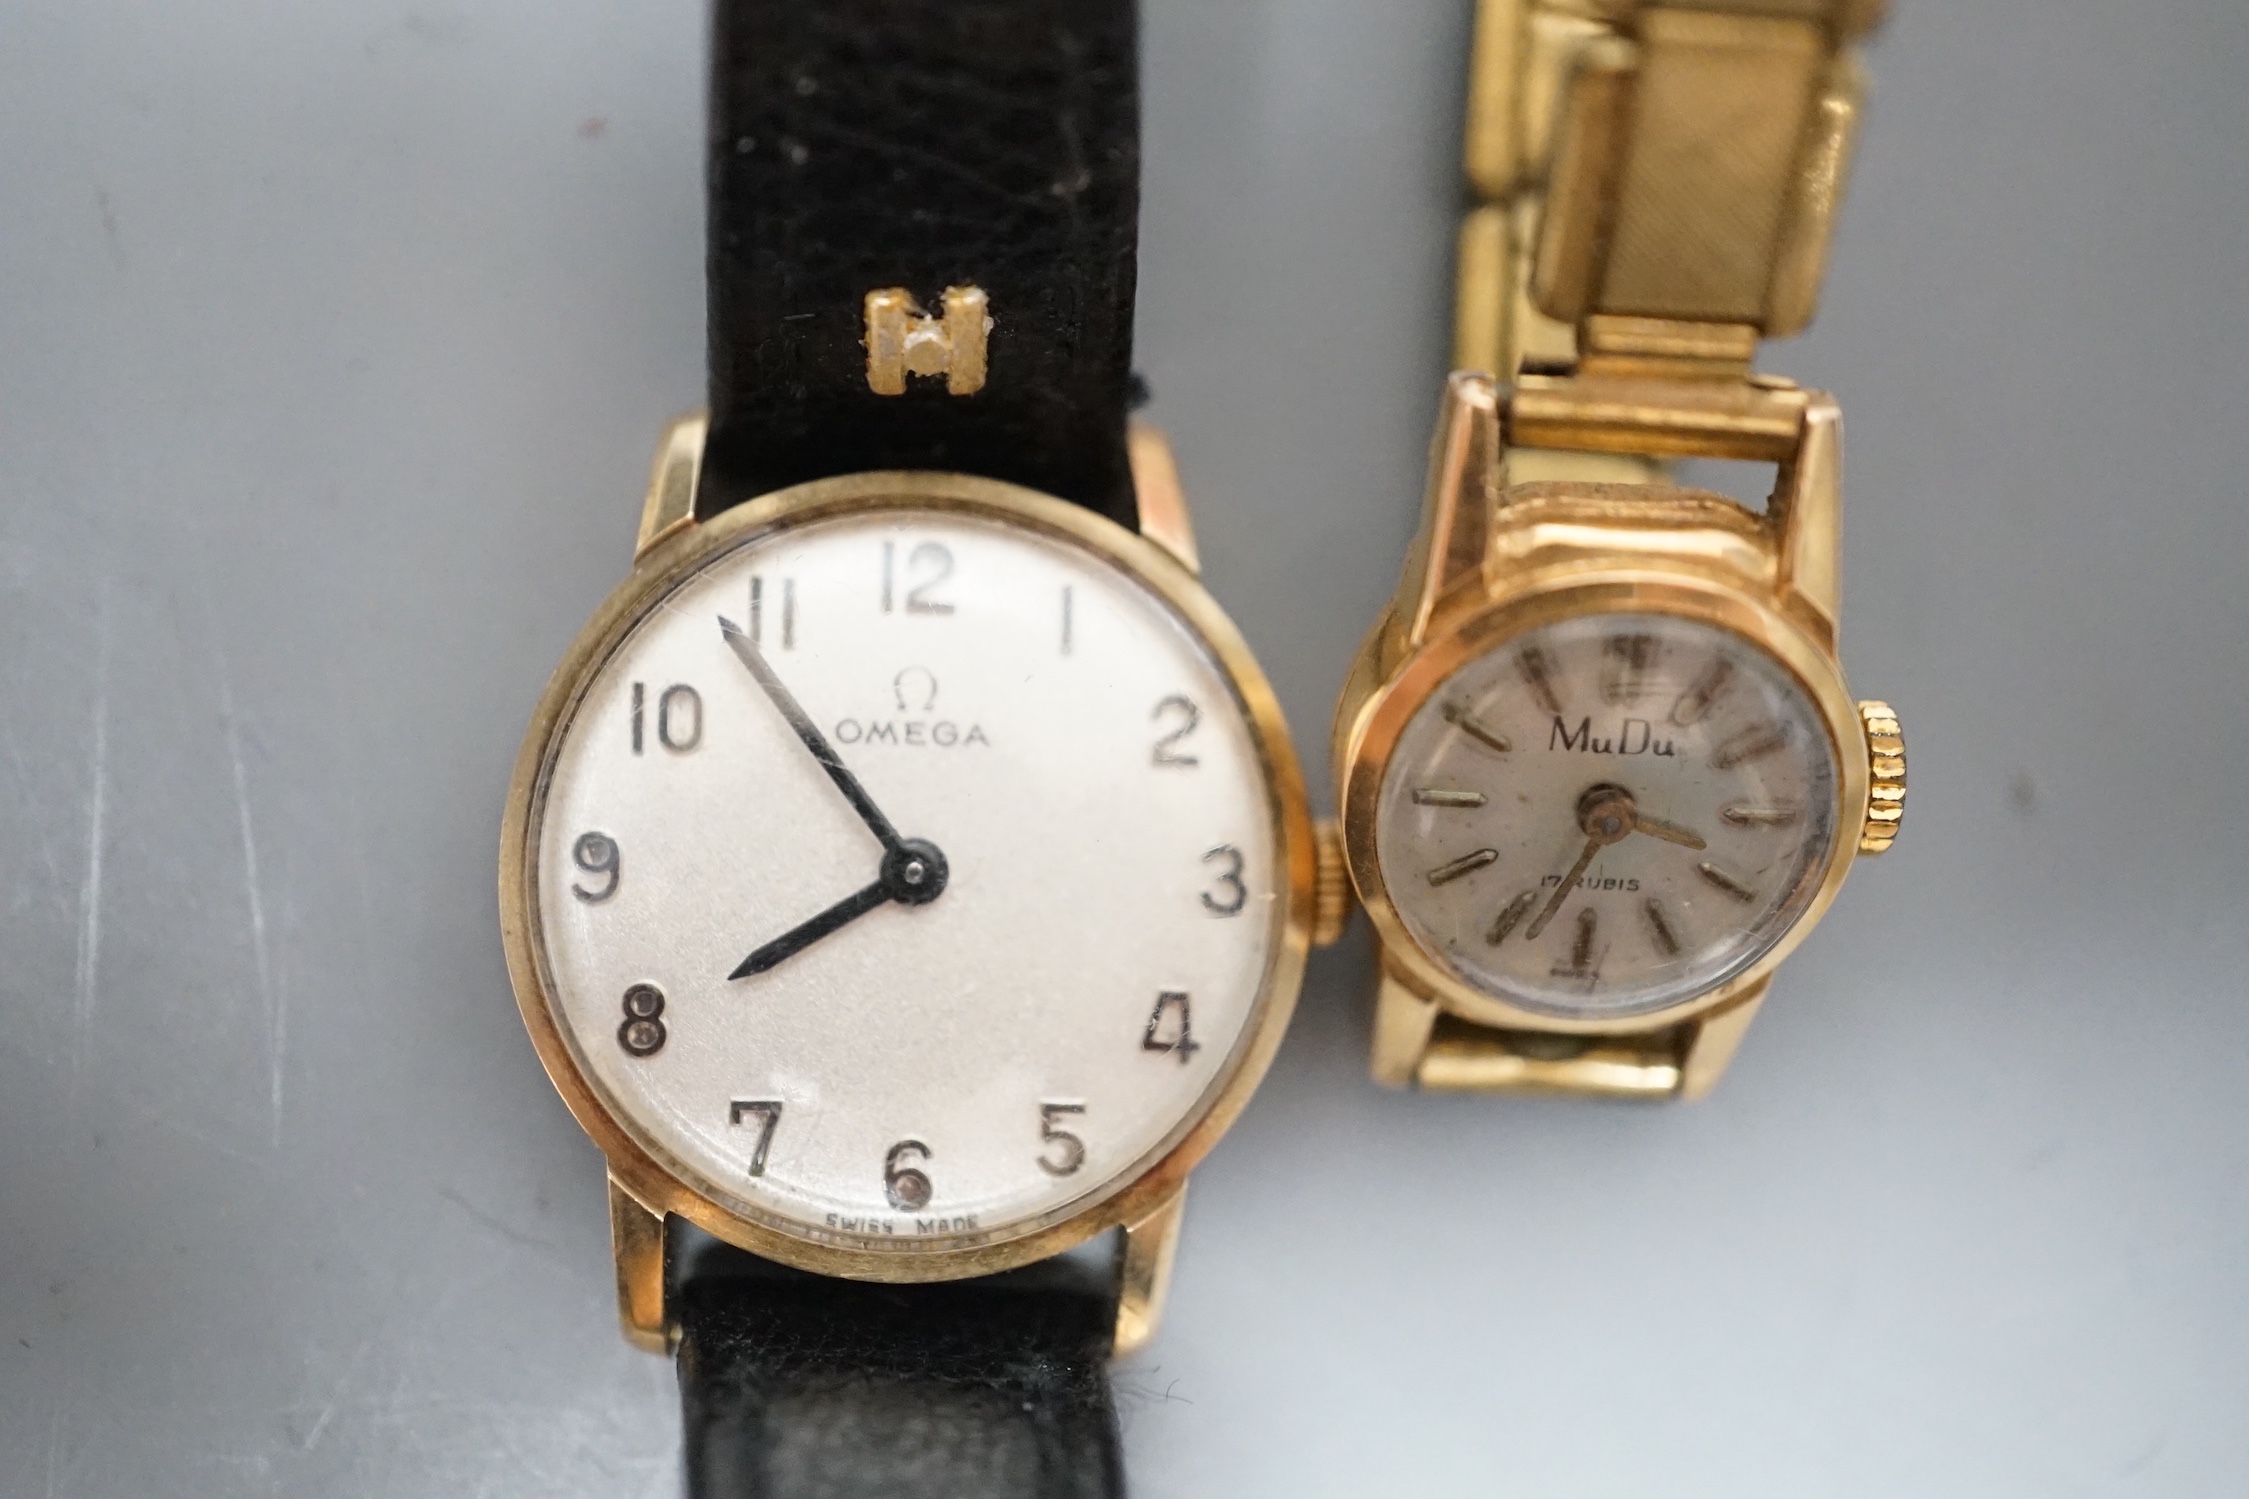 A lady's yellow metal Omega manual wind wrist watch, on a leather strap, with Omega box and a lady's 18k Mudu manual wind wrist watch on gilt metal strap.